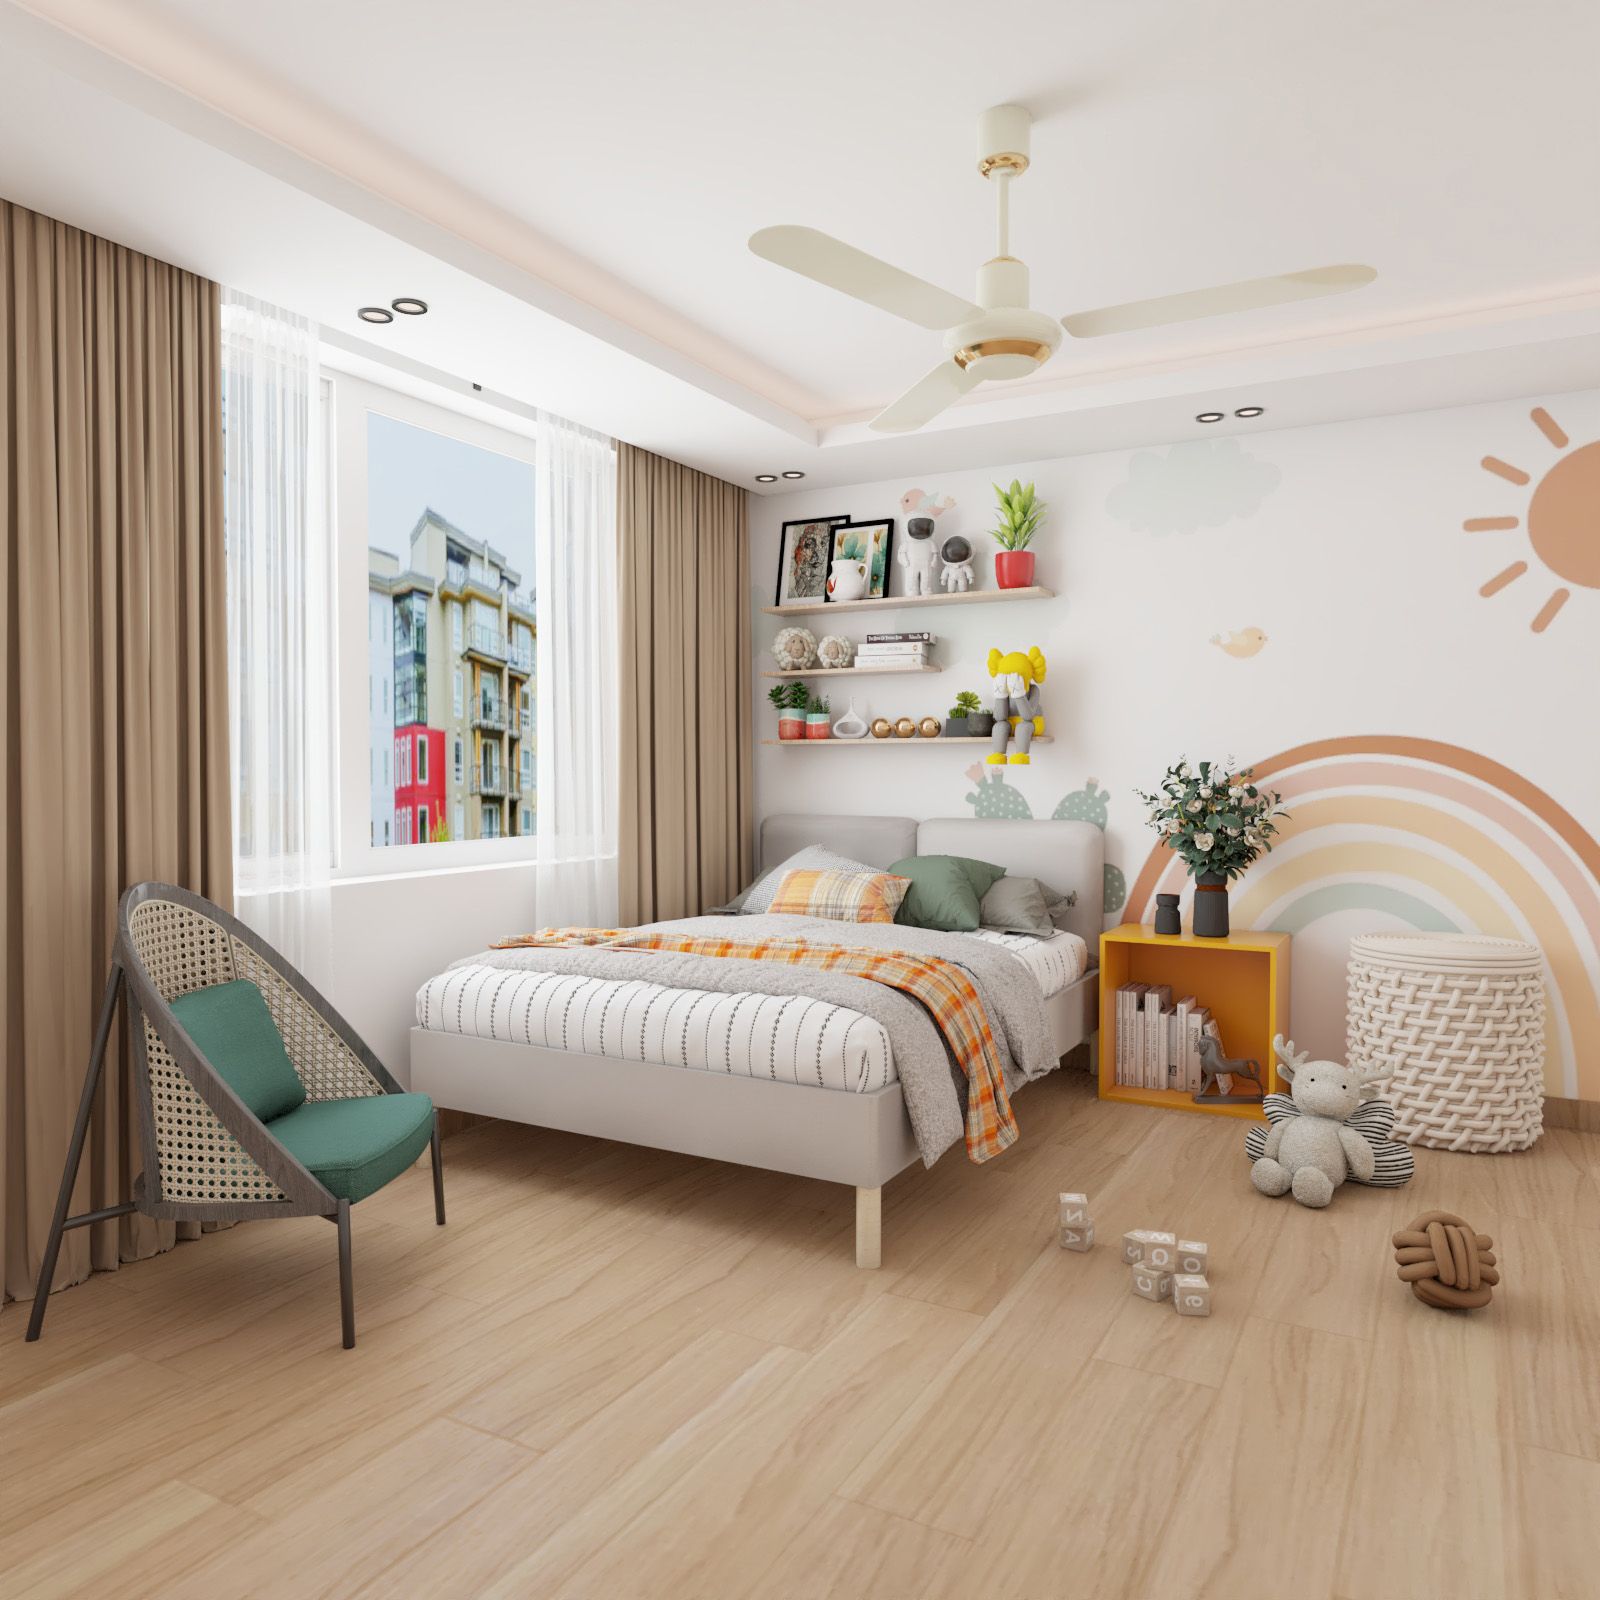 Scandinavian Kids Room Design With Nature-Themed Wallpaper And Dual-Toned Queen Size Bed